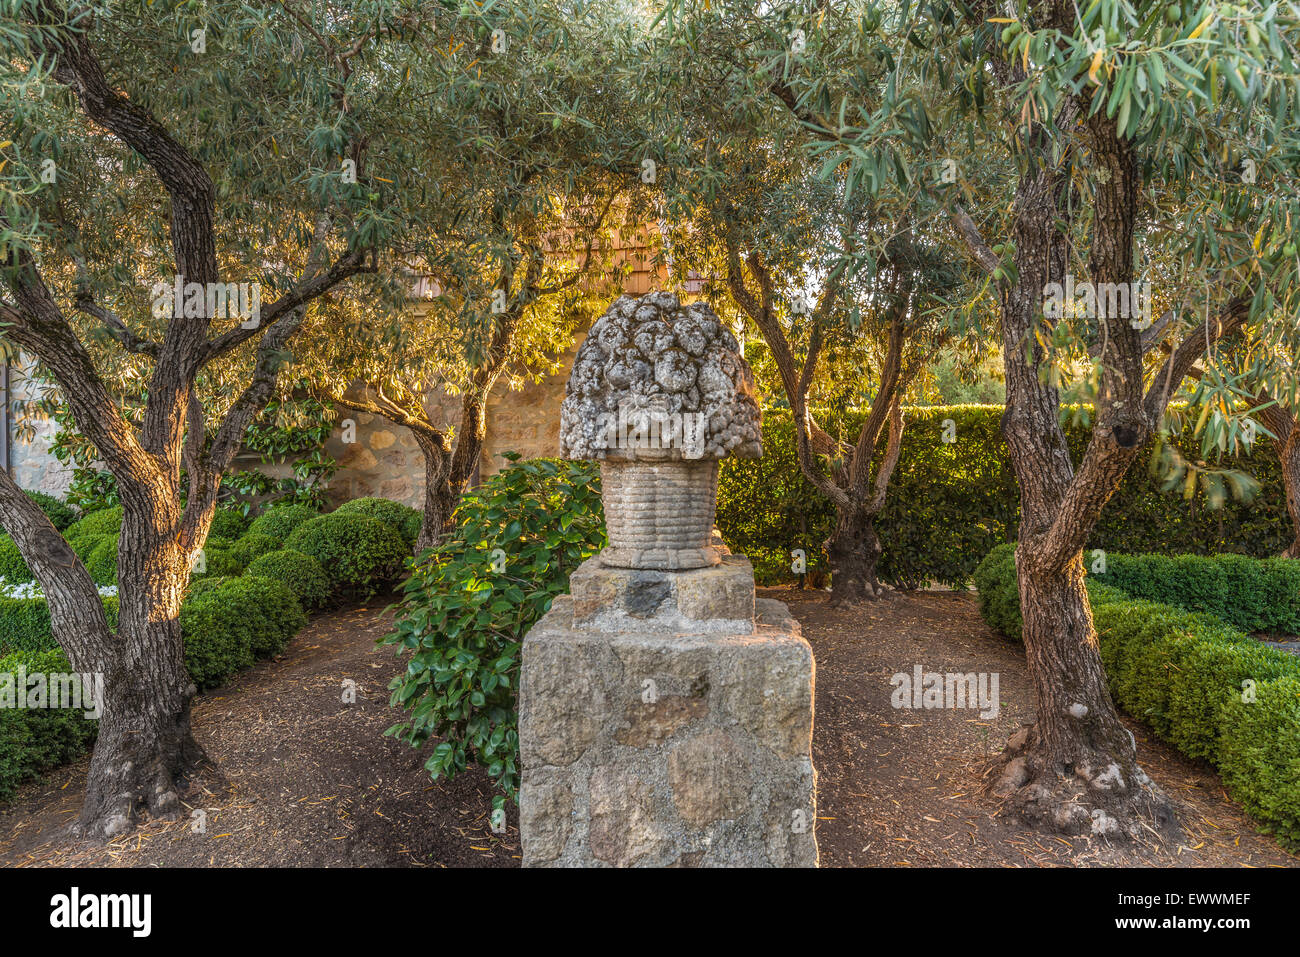 Napa Valley home garden with olive trees and stone statuary Stock Photo